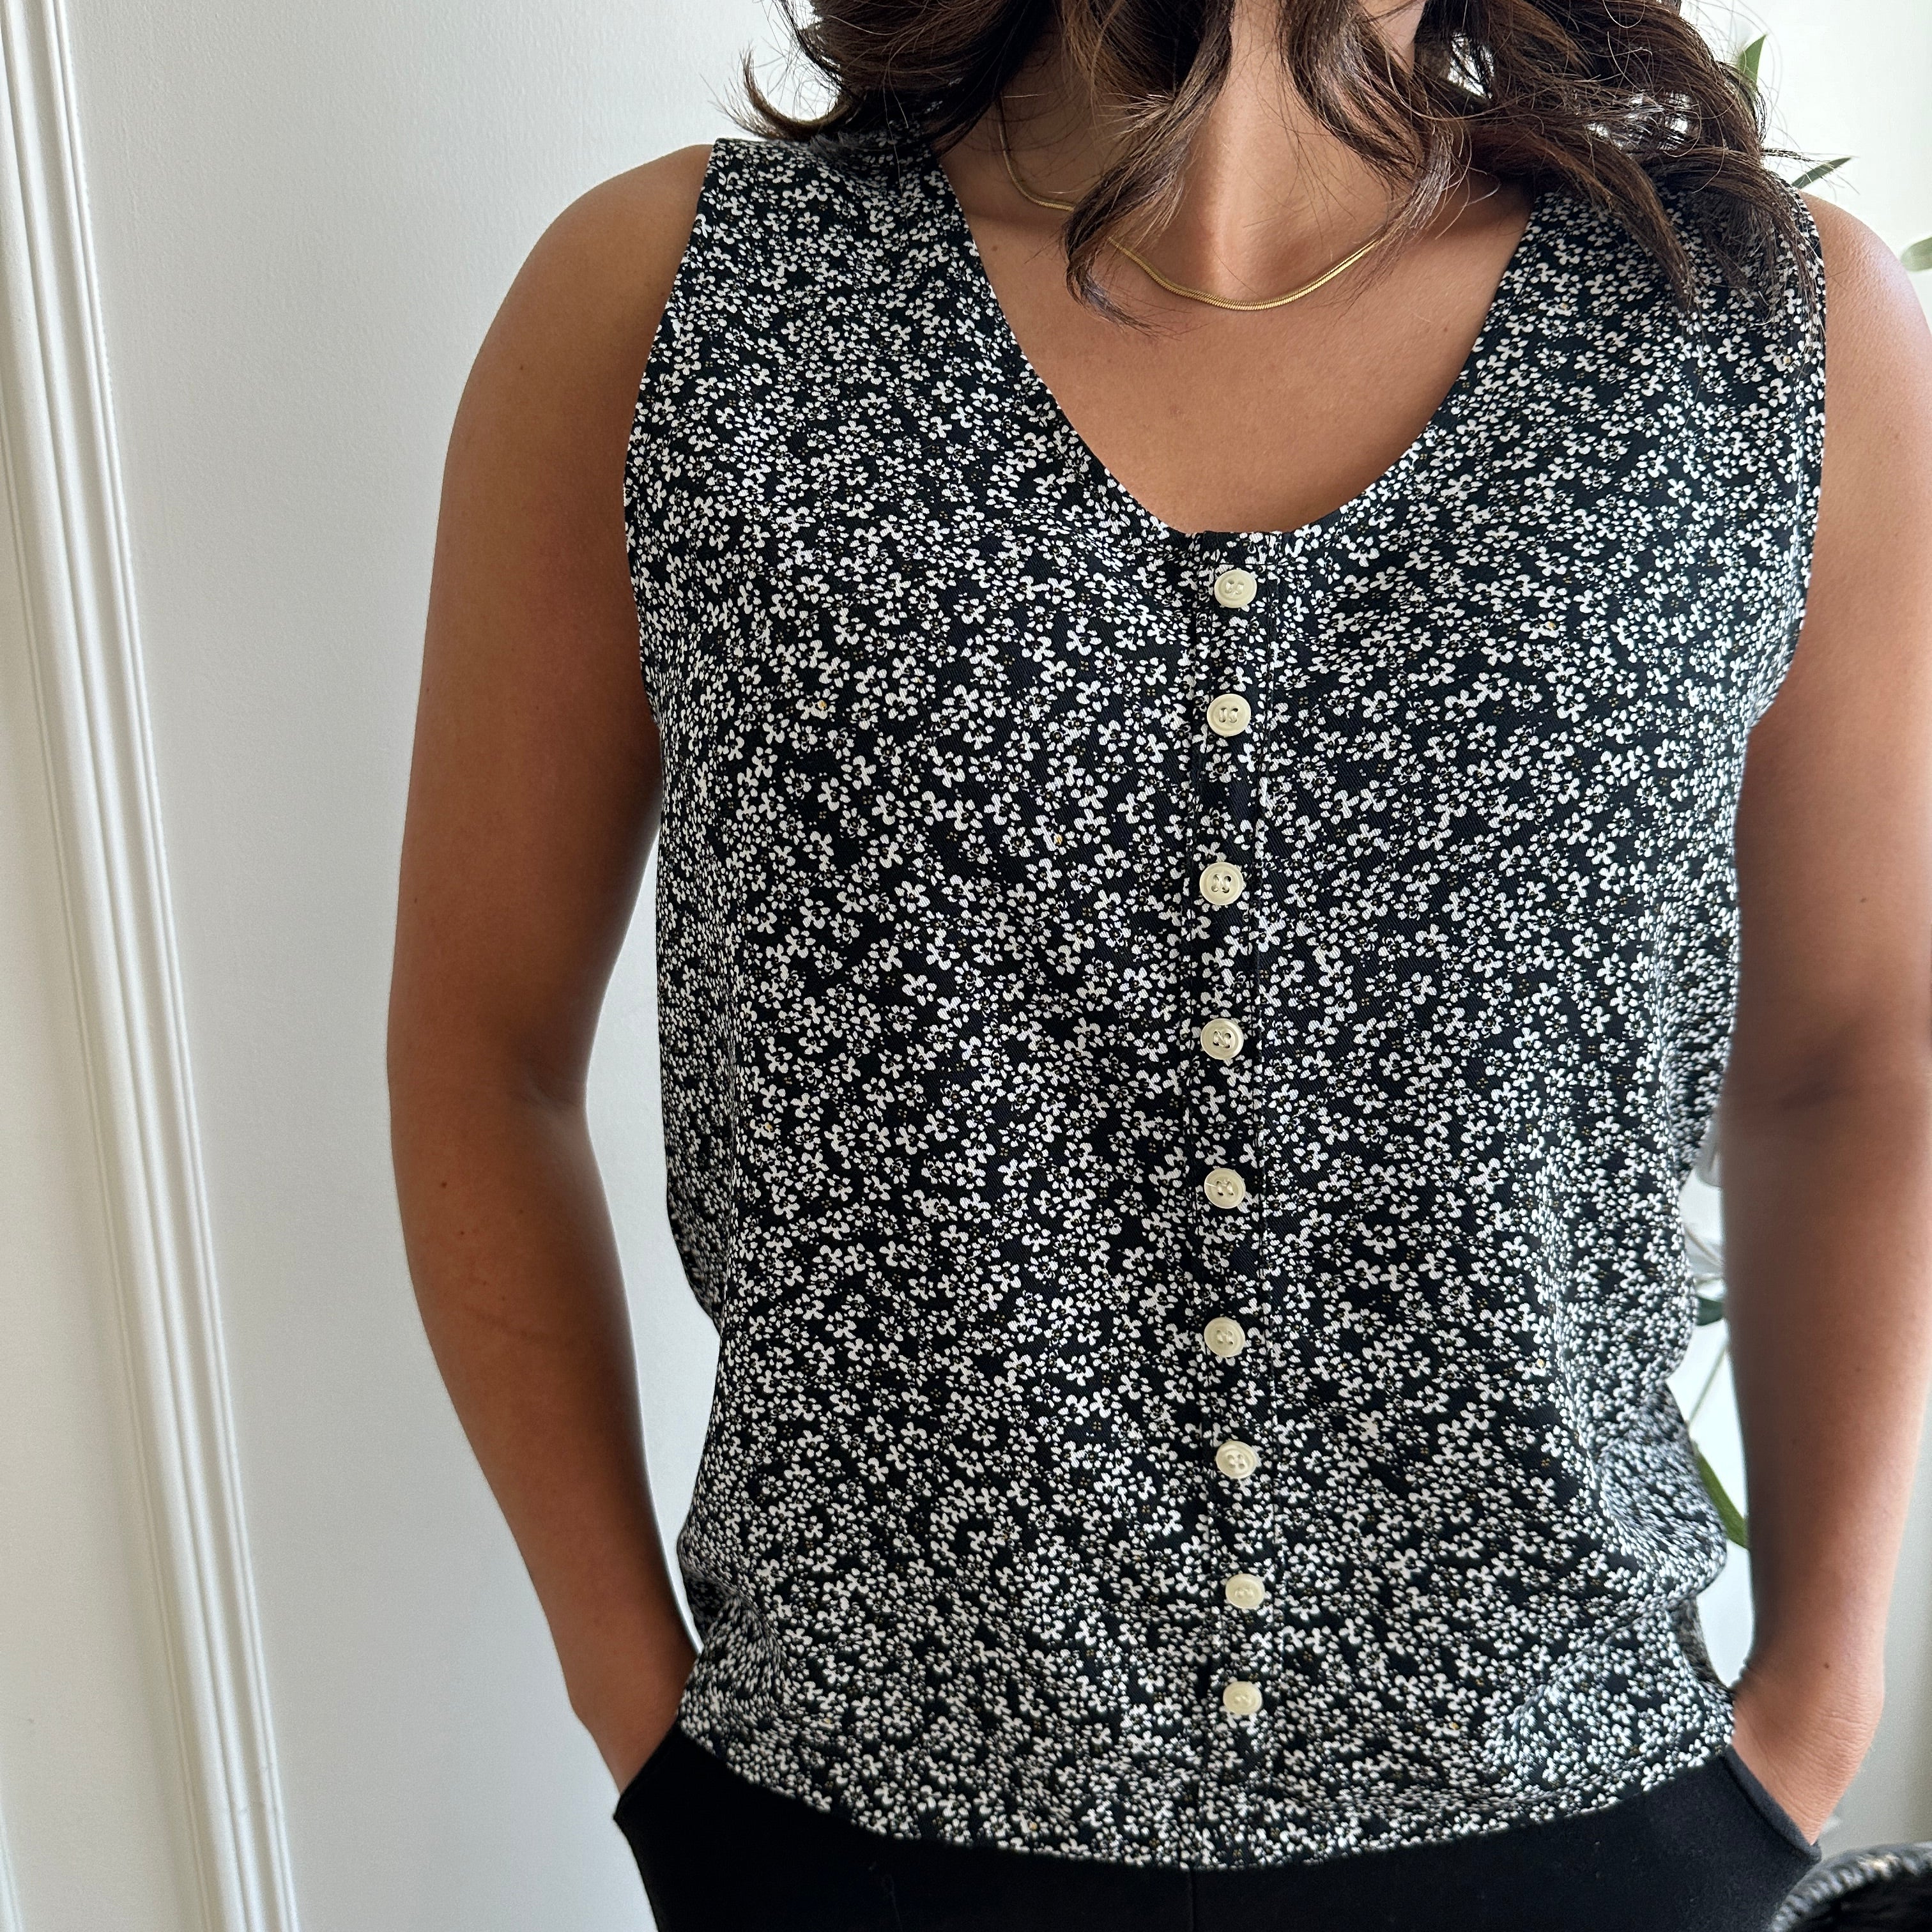 black and white floral loose fitting tank top with white buttons